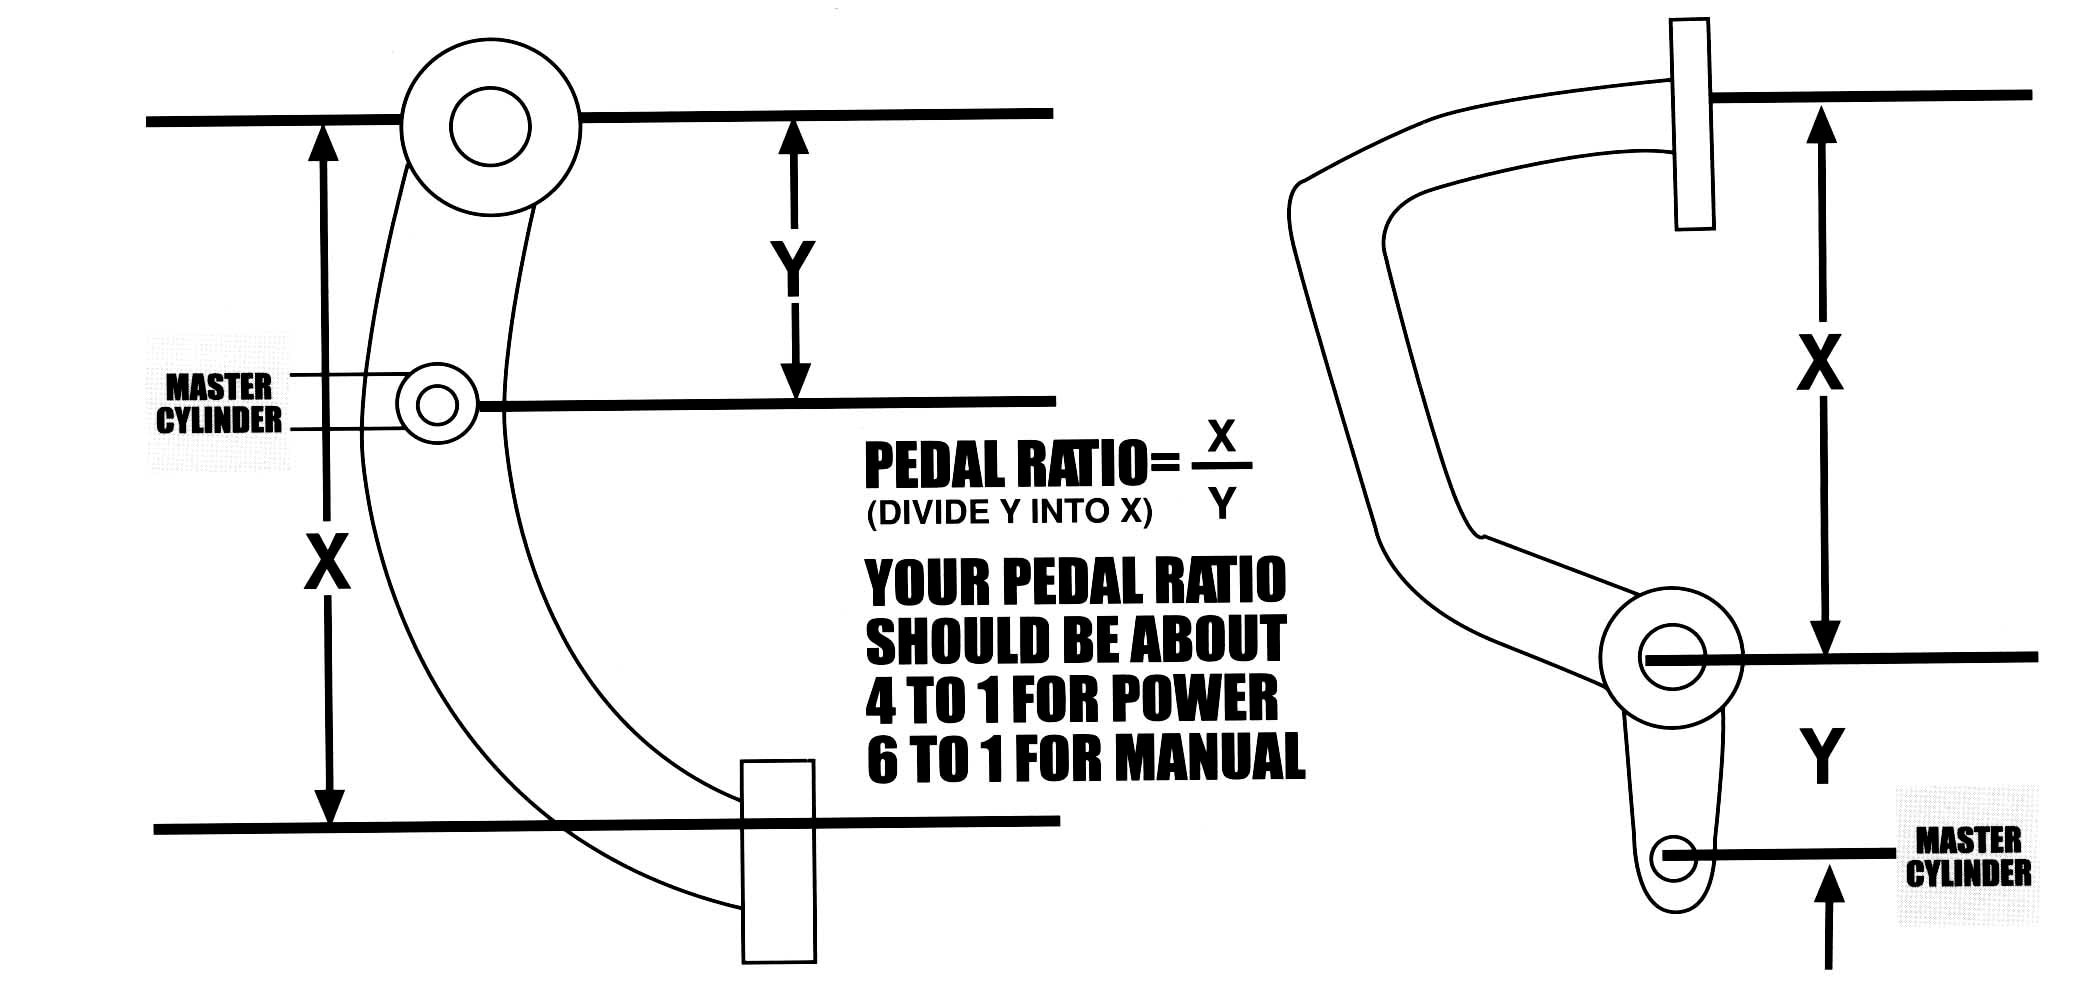 Gm Master Cylinder Diagram Selecting and Installing Brake System Ponents Proper Plumbing Of Gm Master Cylinder Diagram